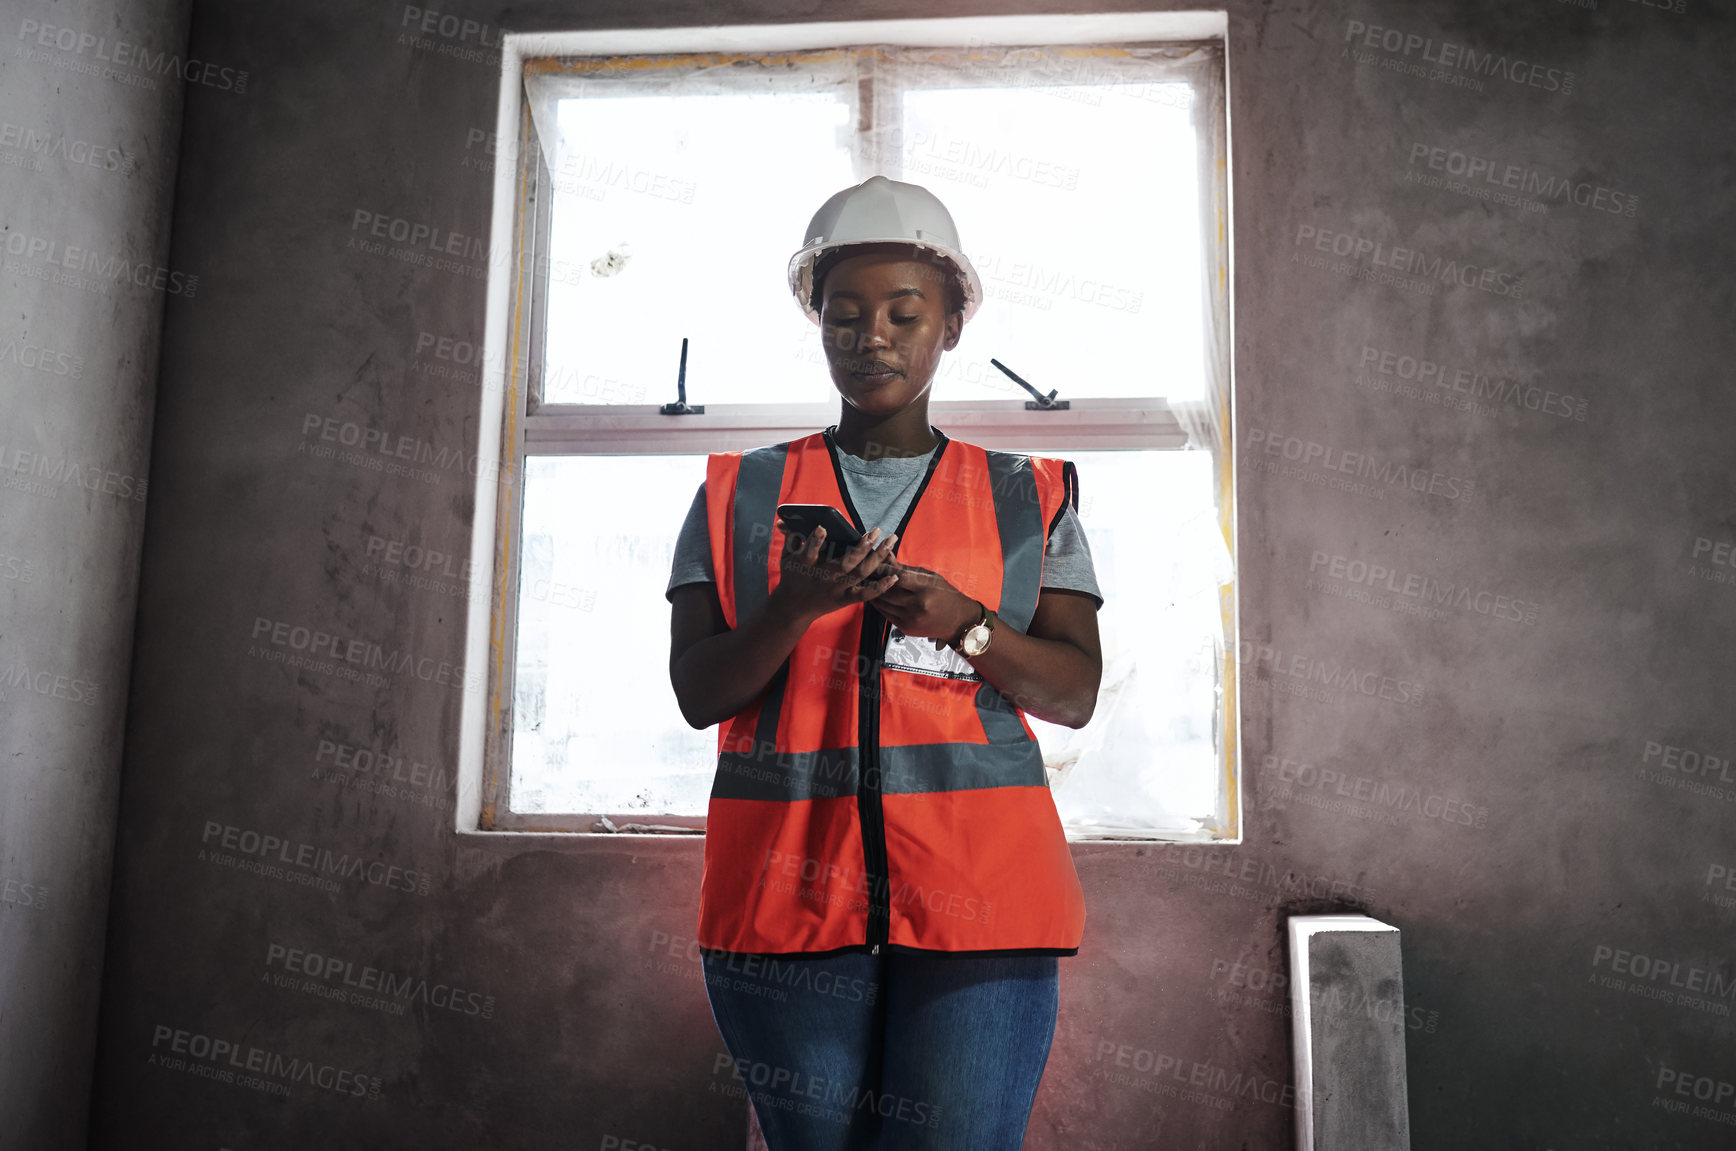 Buy stock photo Shot of a young woman using a smartphone while working at a construction site